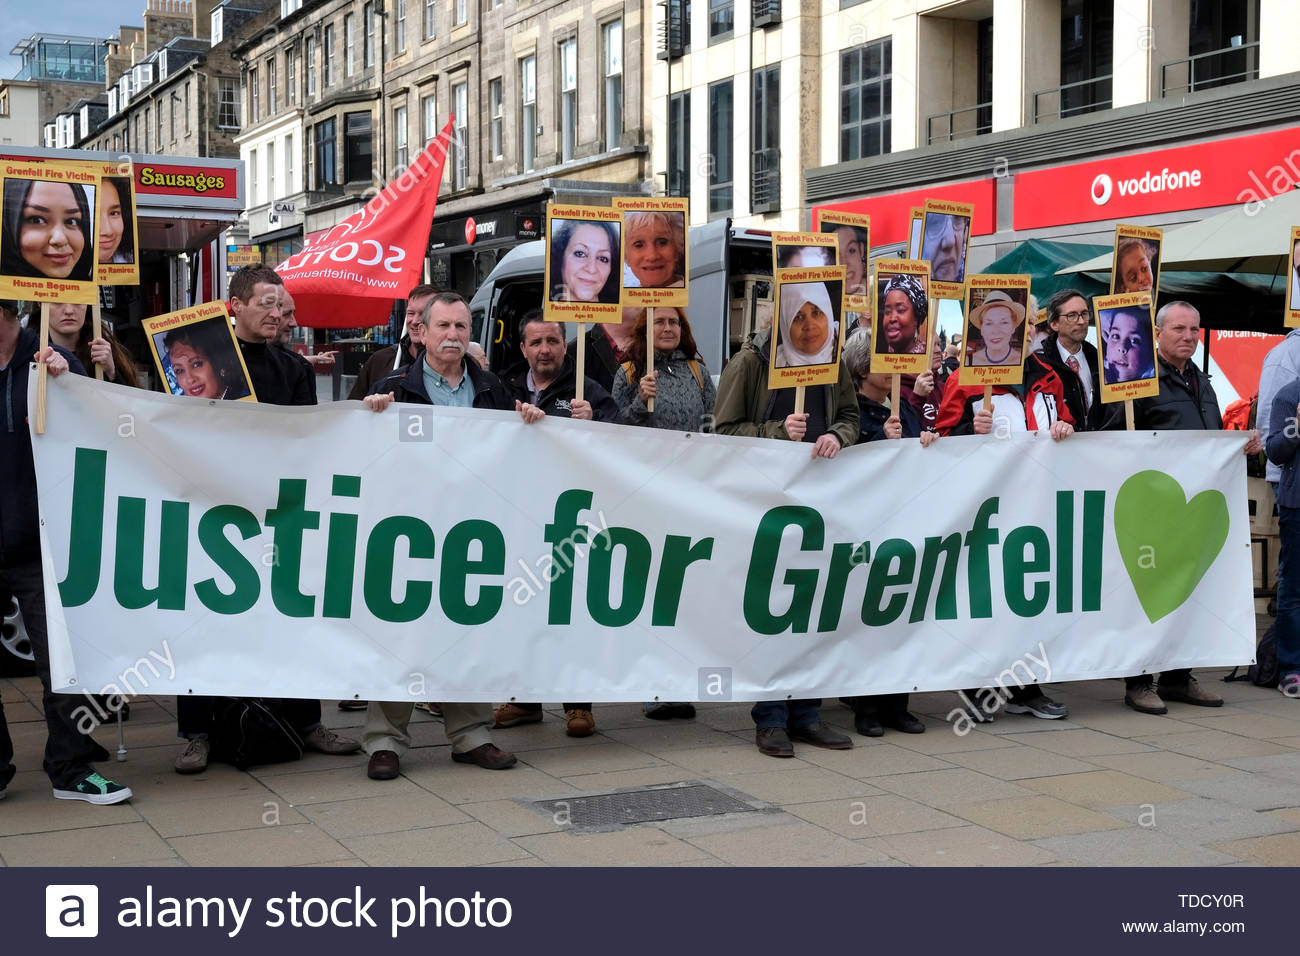 Edinburgh, Scotland, UK. 14th June 2019.  Silent Vigil for the Grenfell Fire disaster, in Castle Street Edinburgh. On the second anniversary of the Grenfell fire, campaigners hold a silent vigil.  Credit: Craig Brown Stock Photo